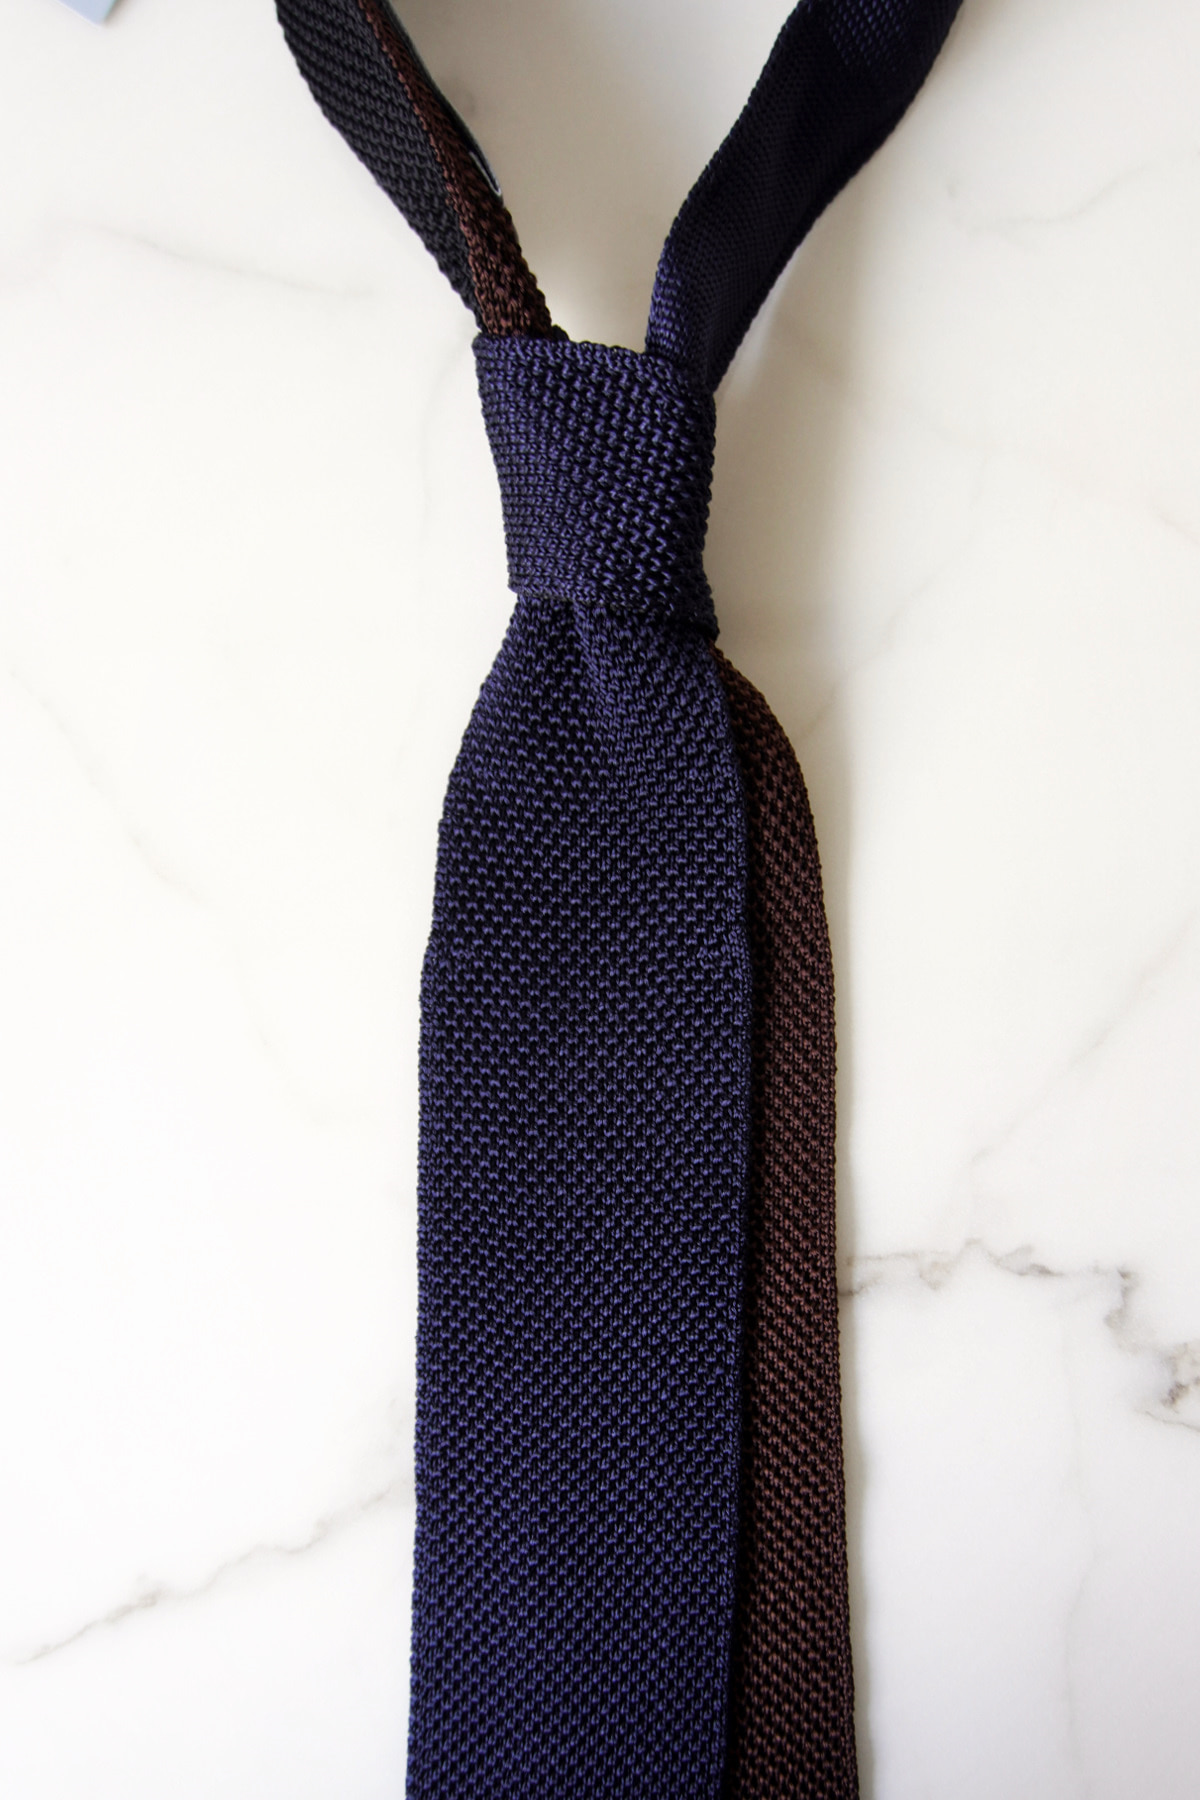 [KENNETH FIELD] 4 Face Silk  Knitted  Solid Tie - Black/Navy/Choco/Black